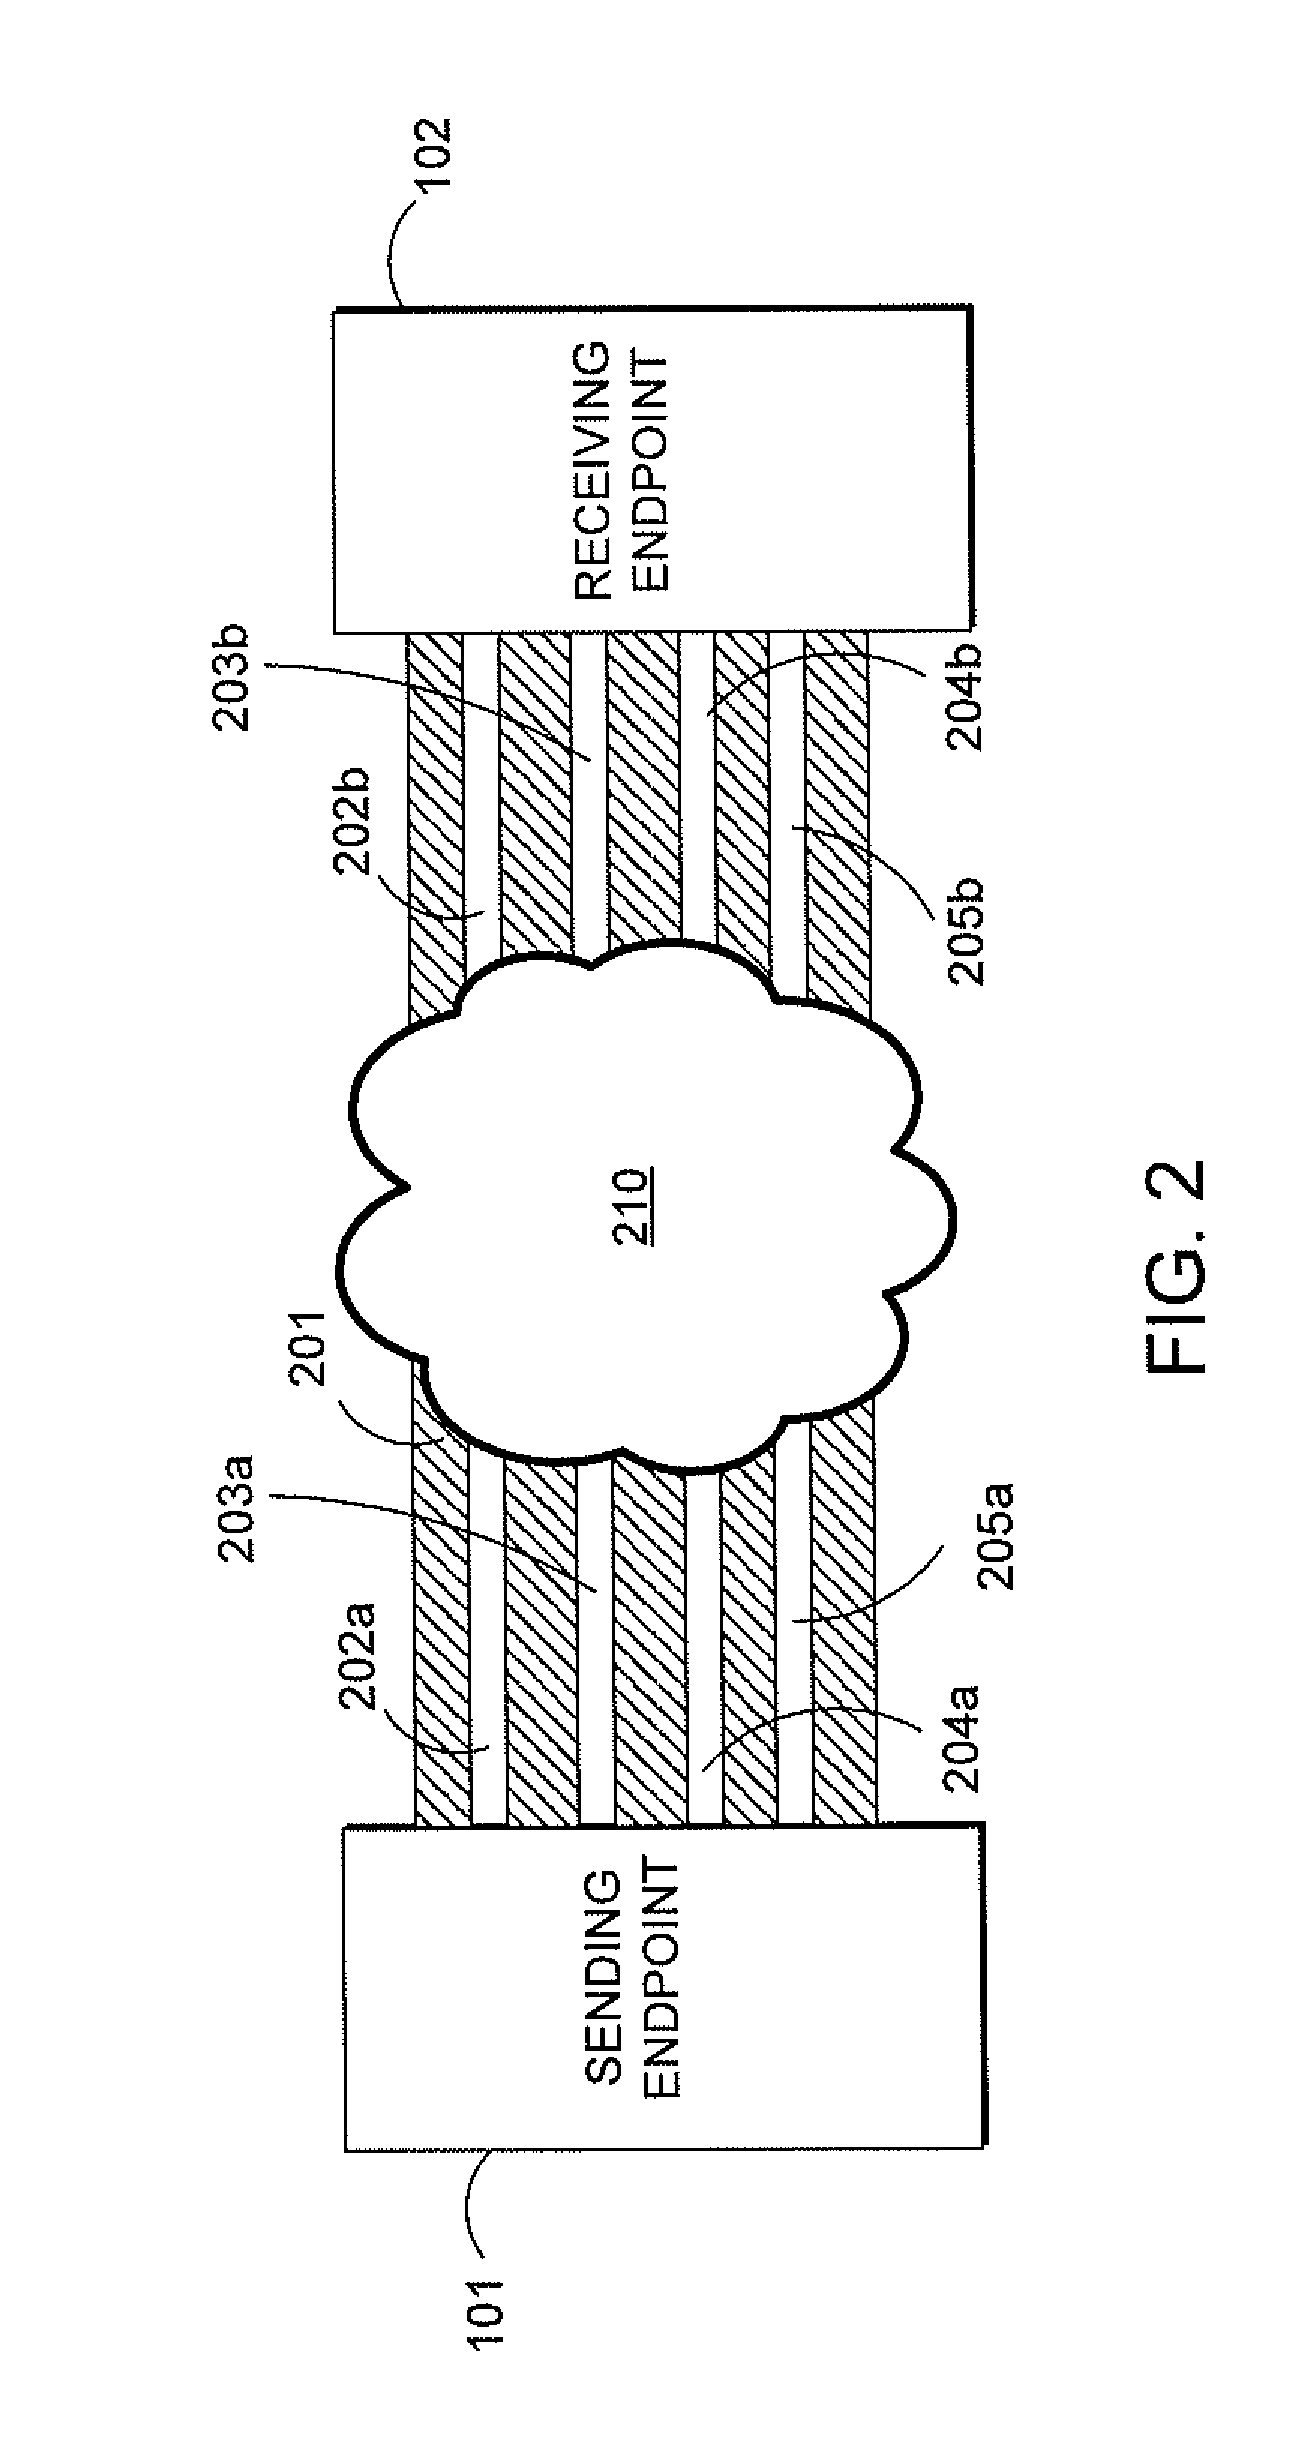 Network streaming of a video stream over multiple communication channels